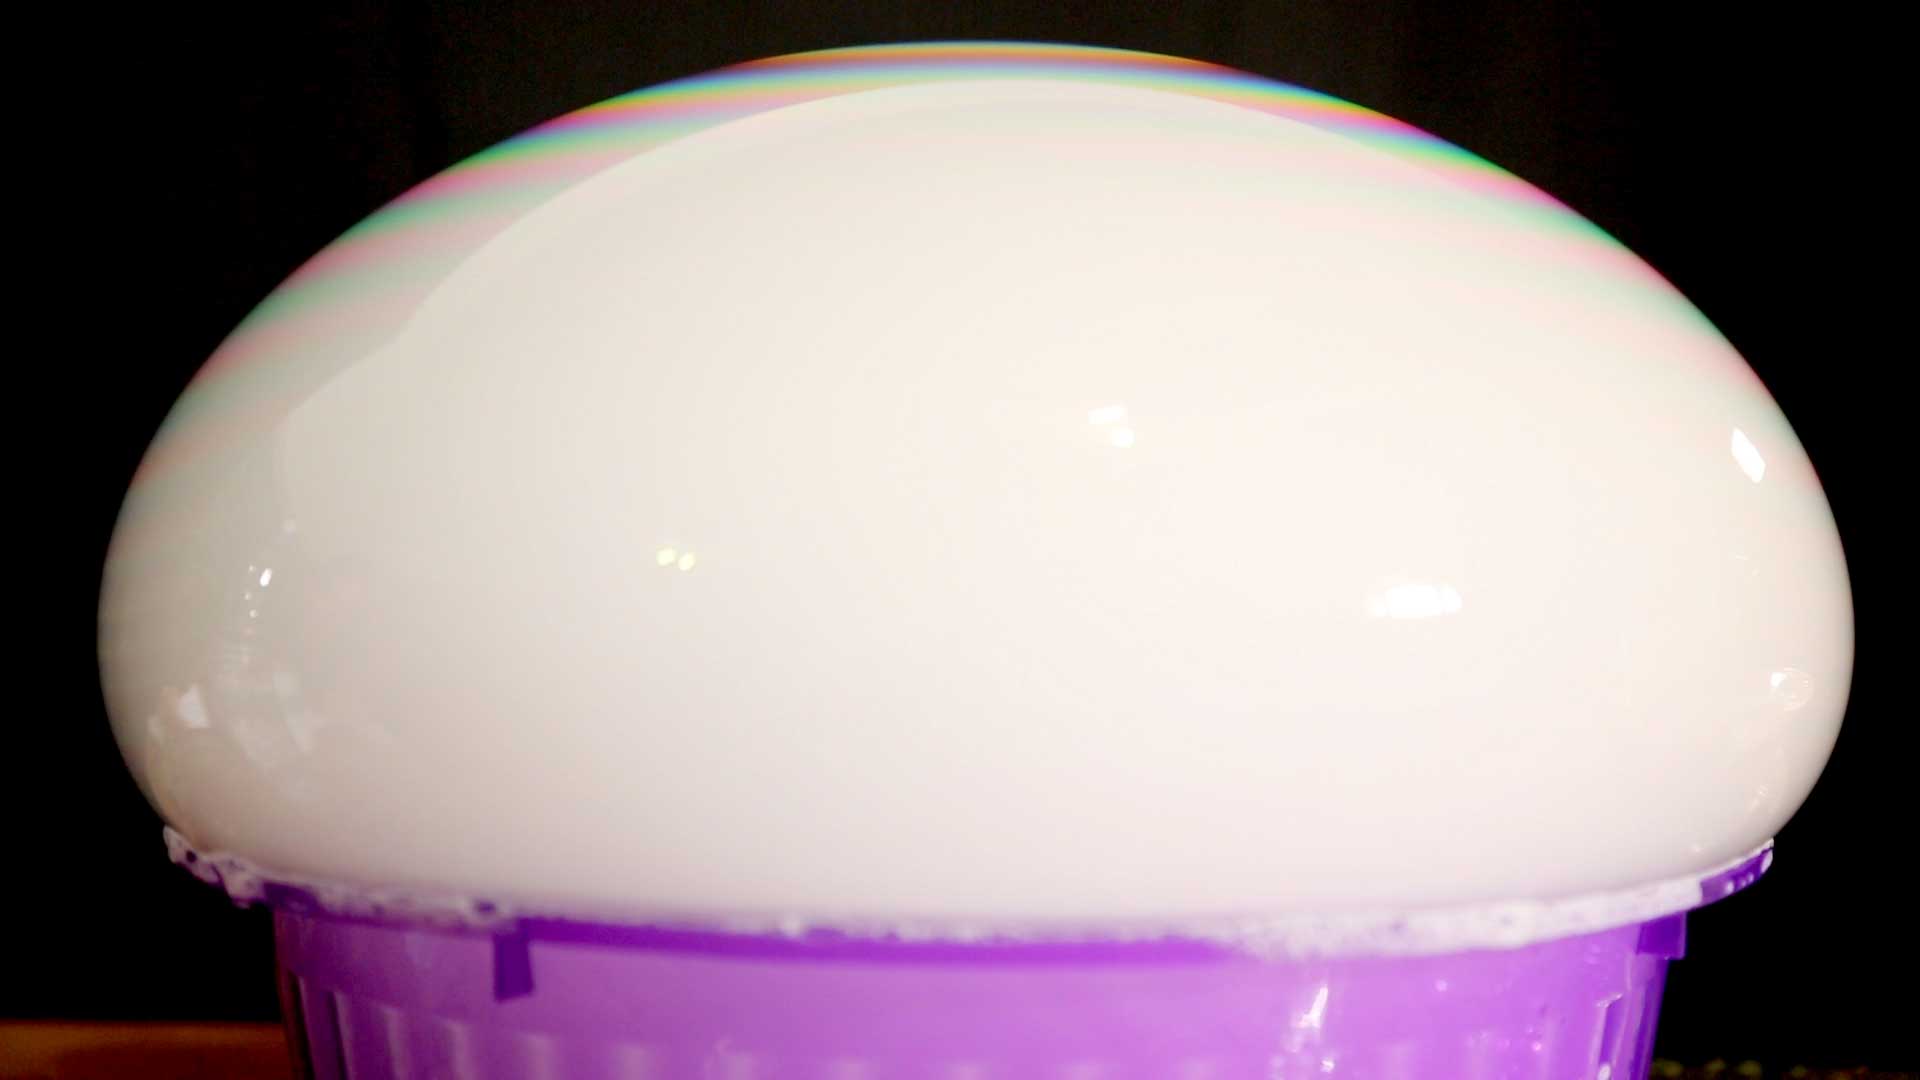 Science for Kids show some really cool Dry ice experiments